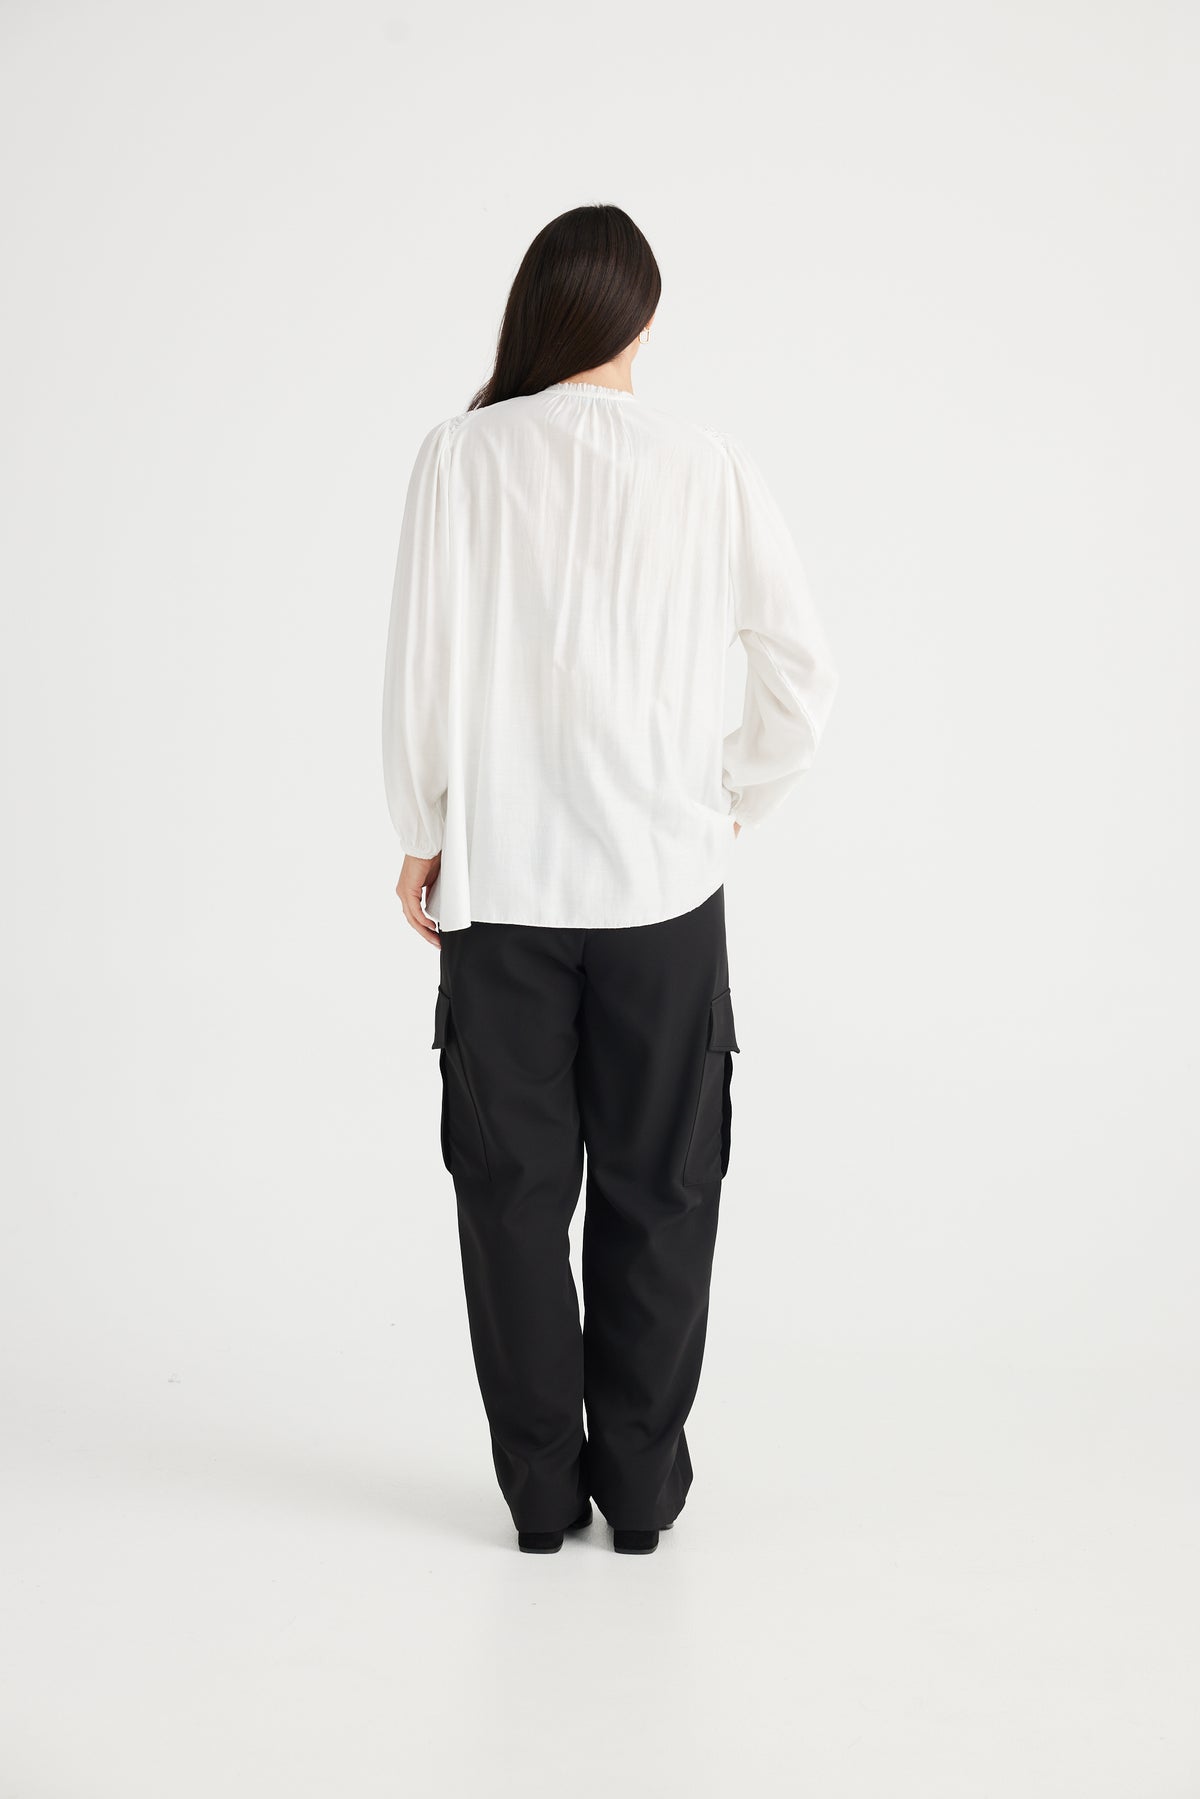 Picadilly Top White